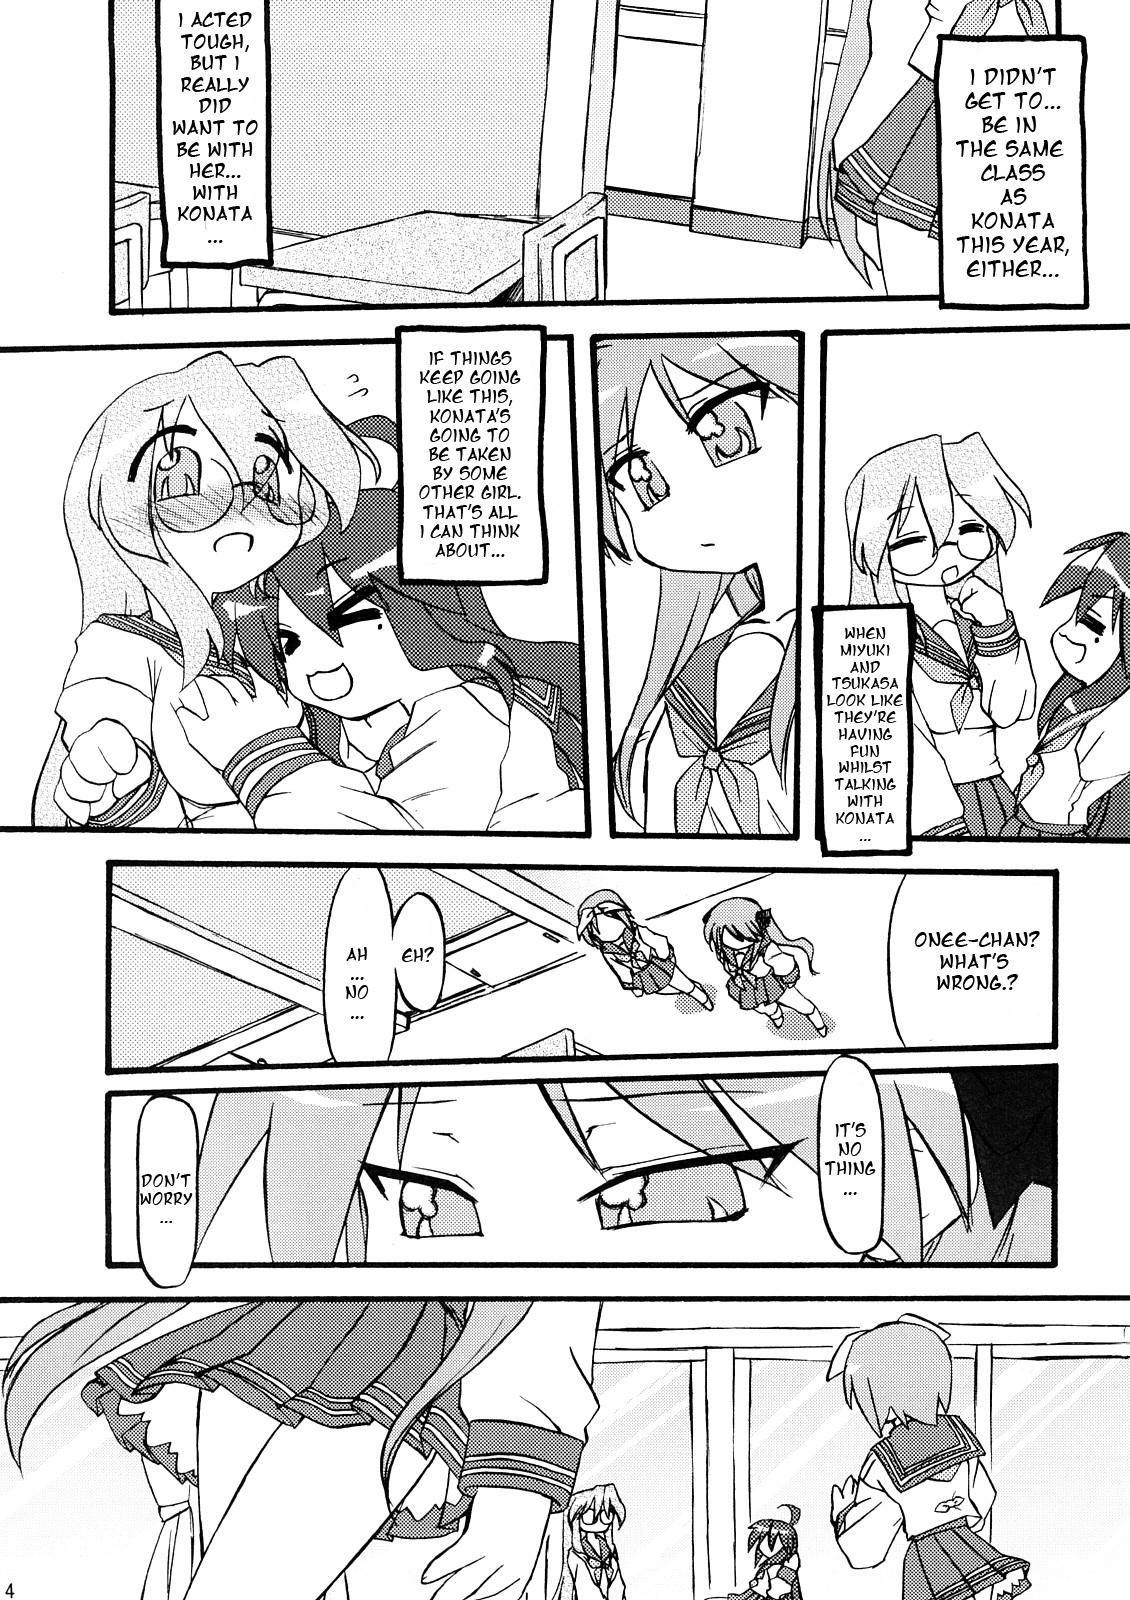 Holes Ao Sumire - Lucky star Kissing - Page 3